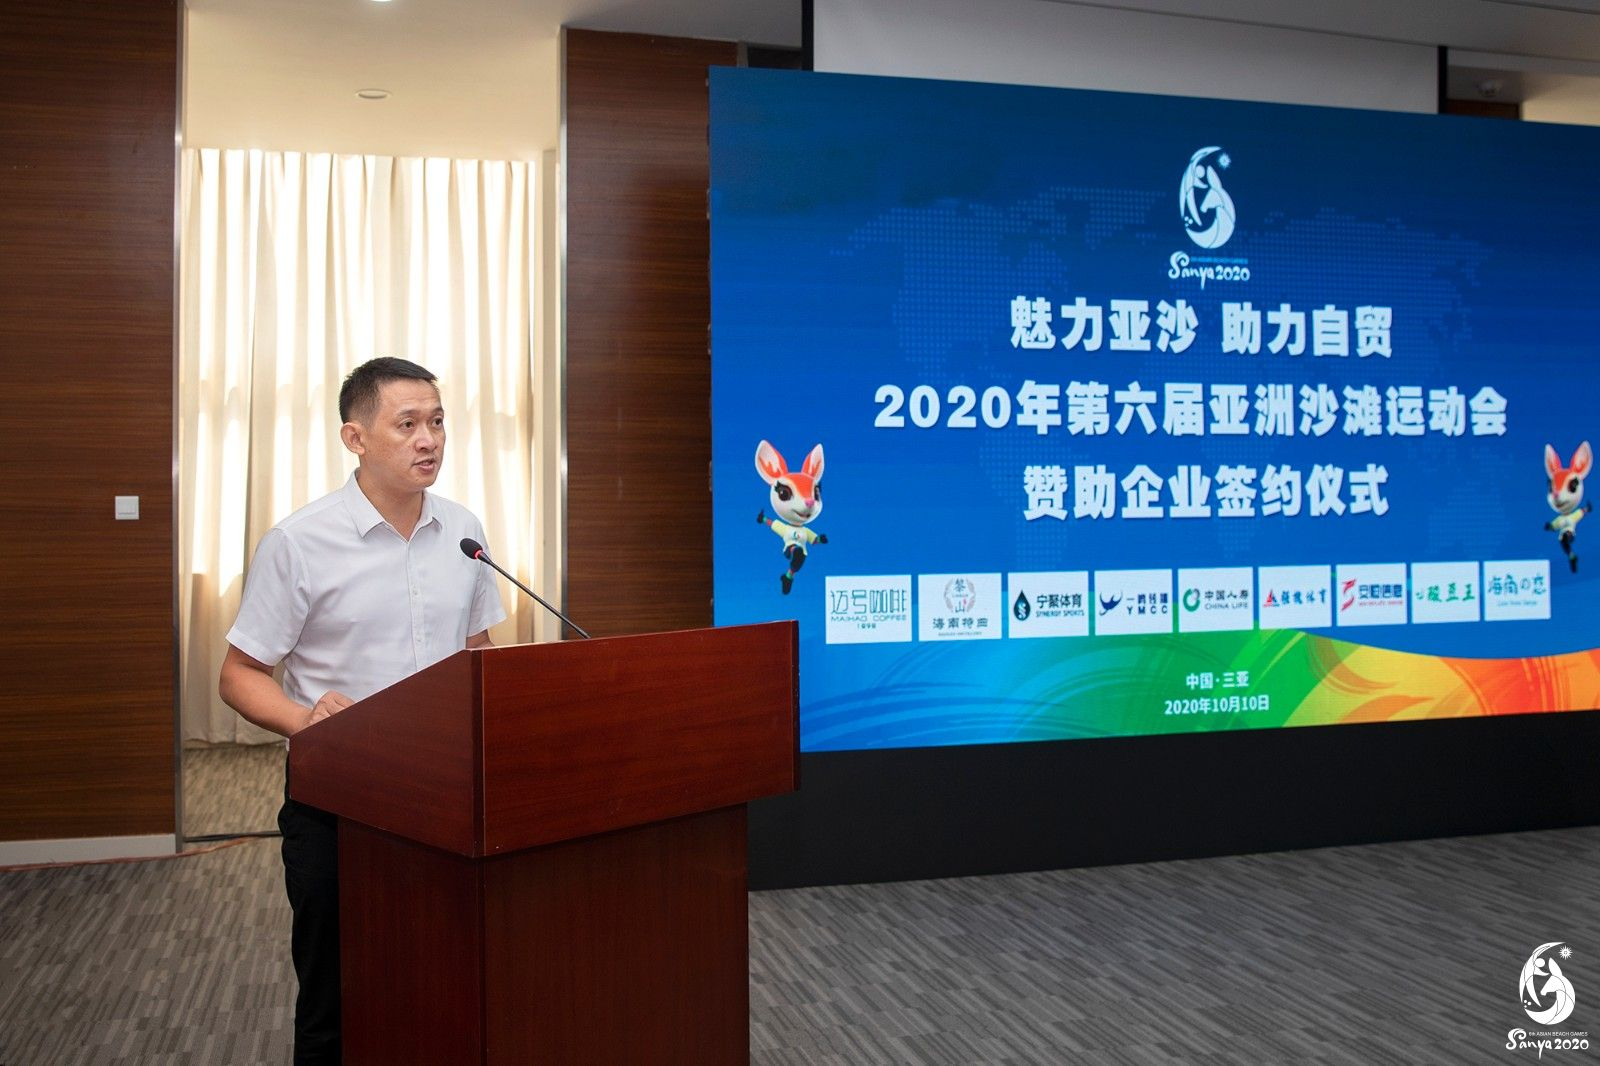 Sanya 2020 held a signing ceremony for the sponsors ©Sanya 2020